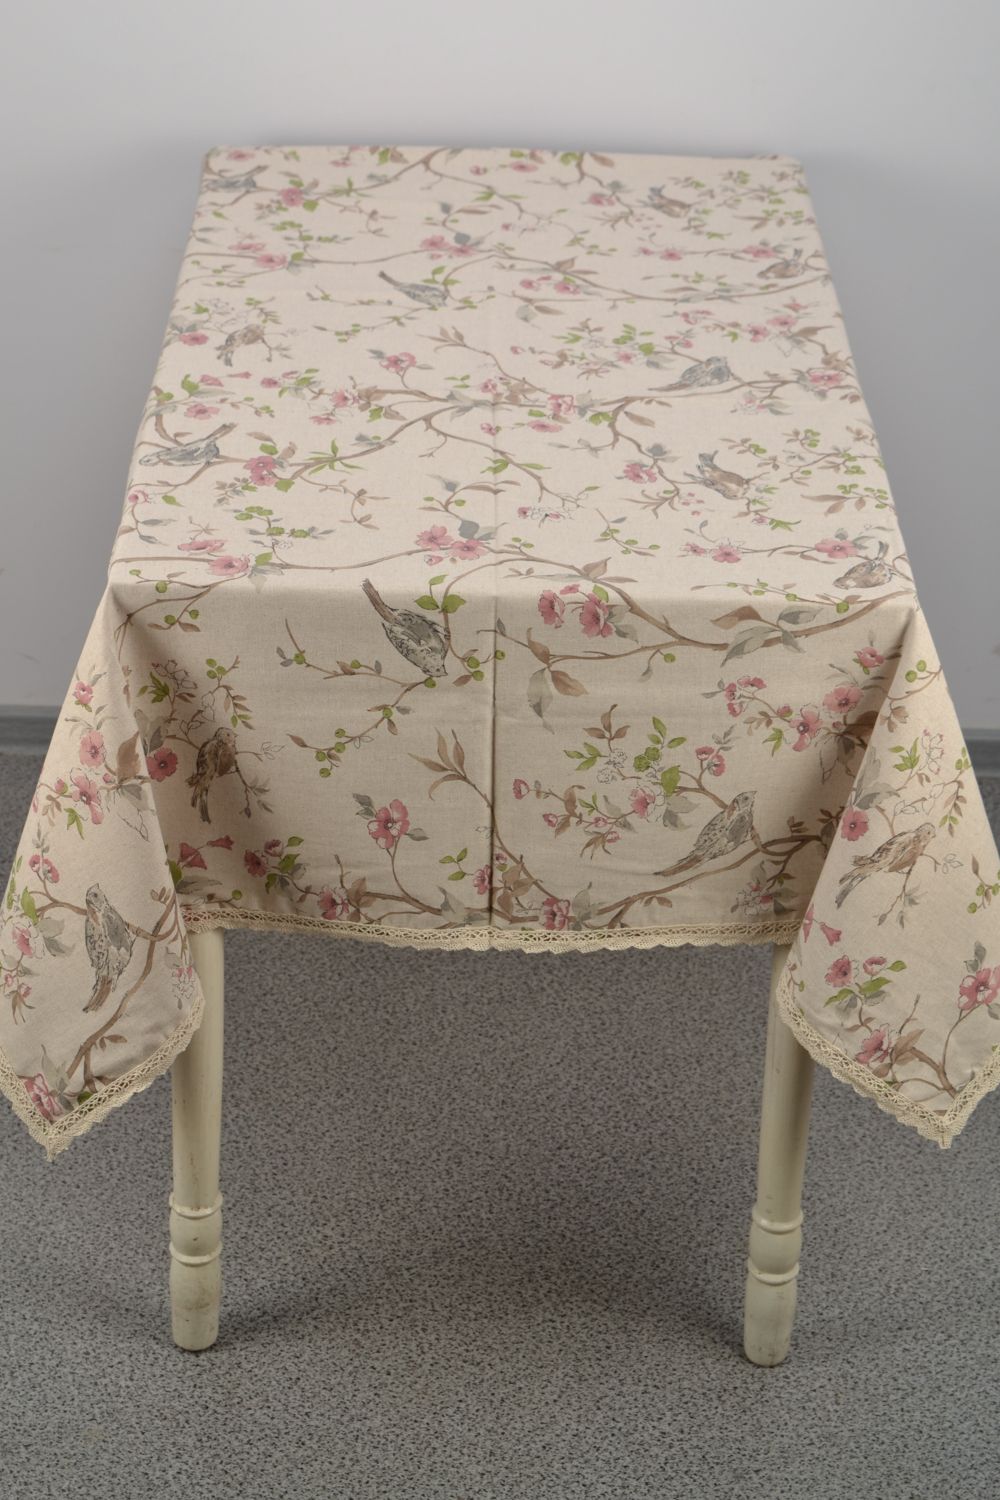 Handmade lacy cotton tablecloth photo 2